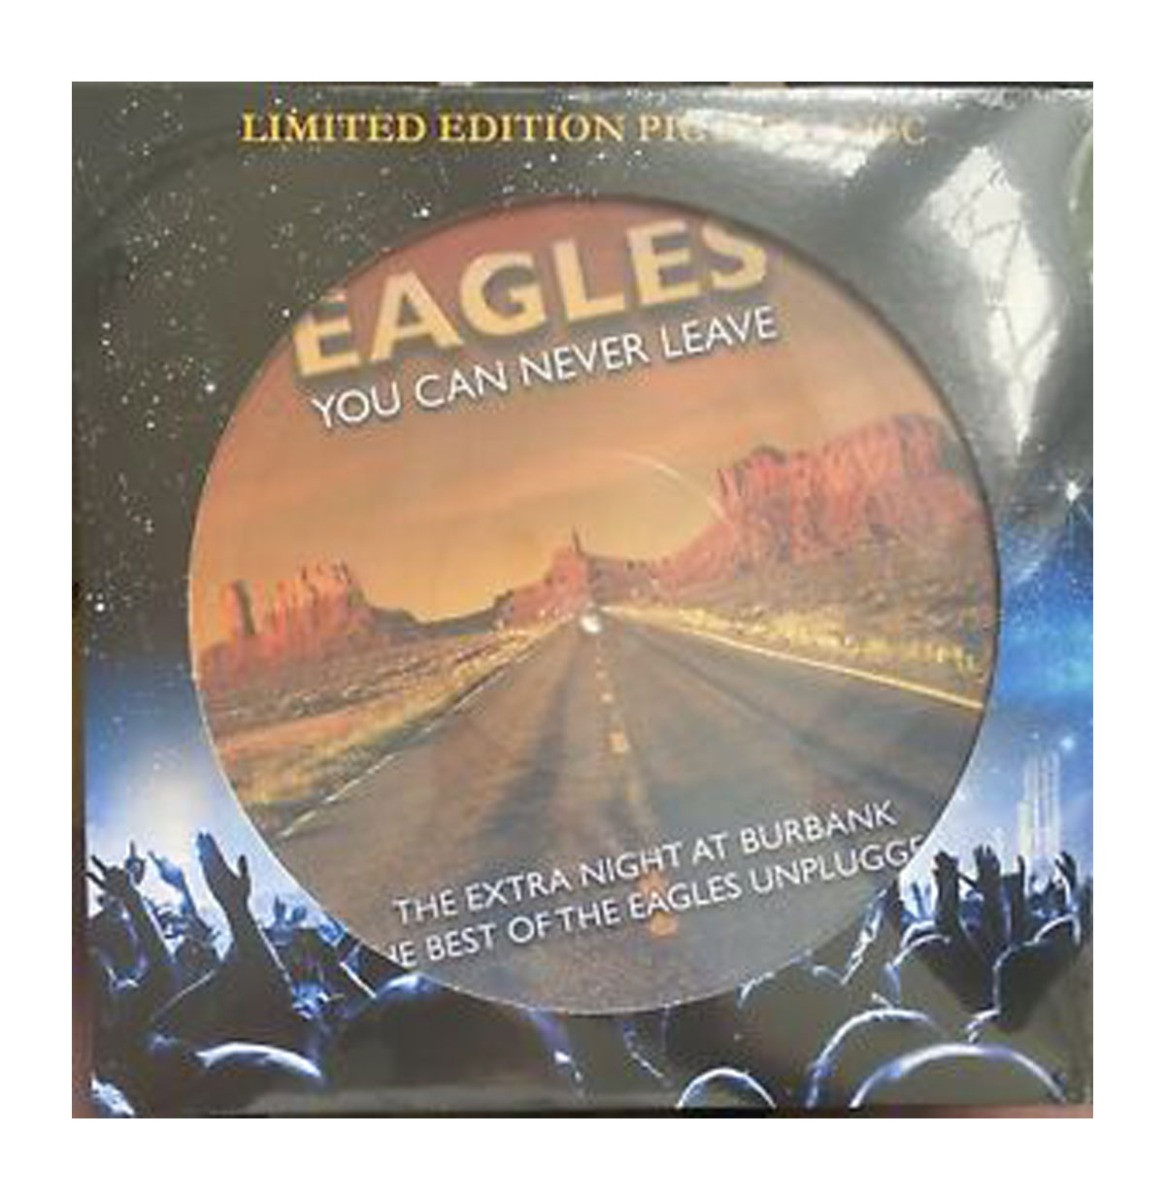 Eagles - You Can Never Leave (Picture Disc) (Limited Edition) LP